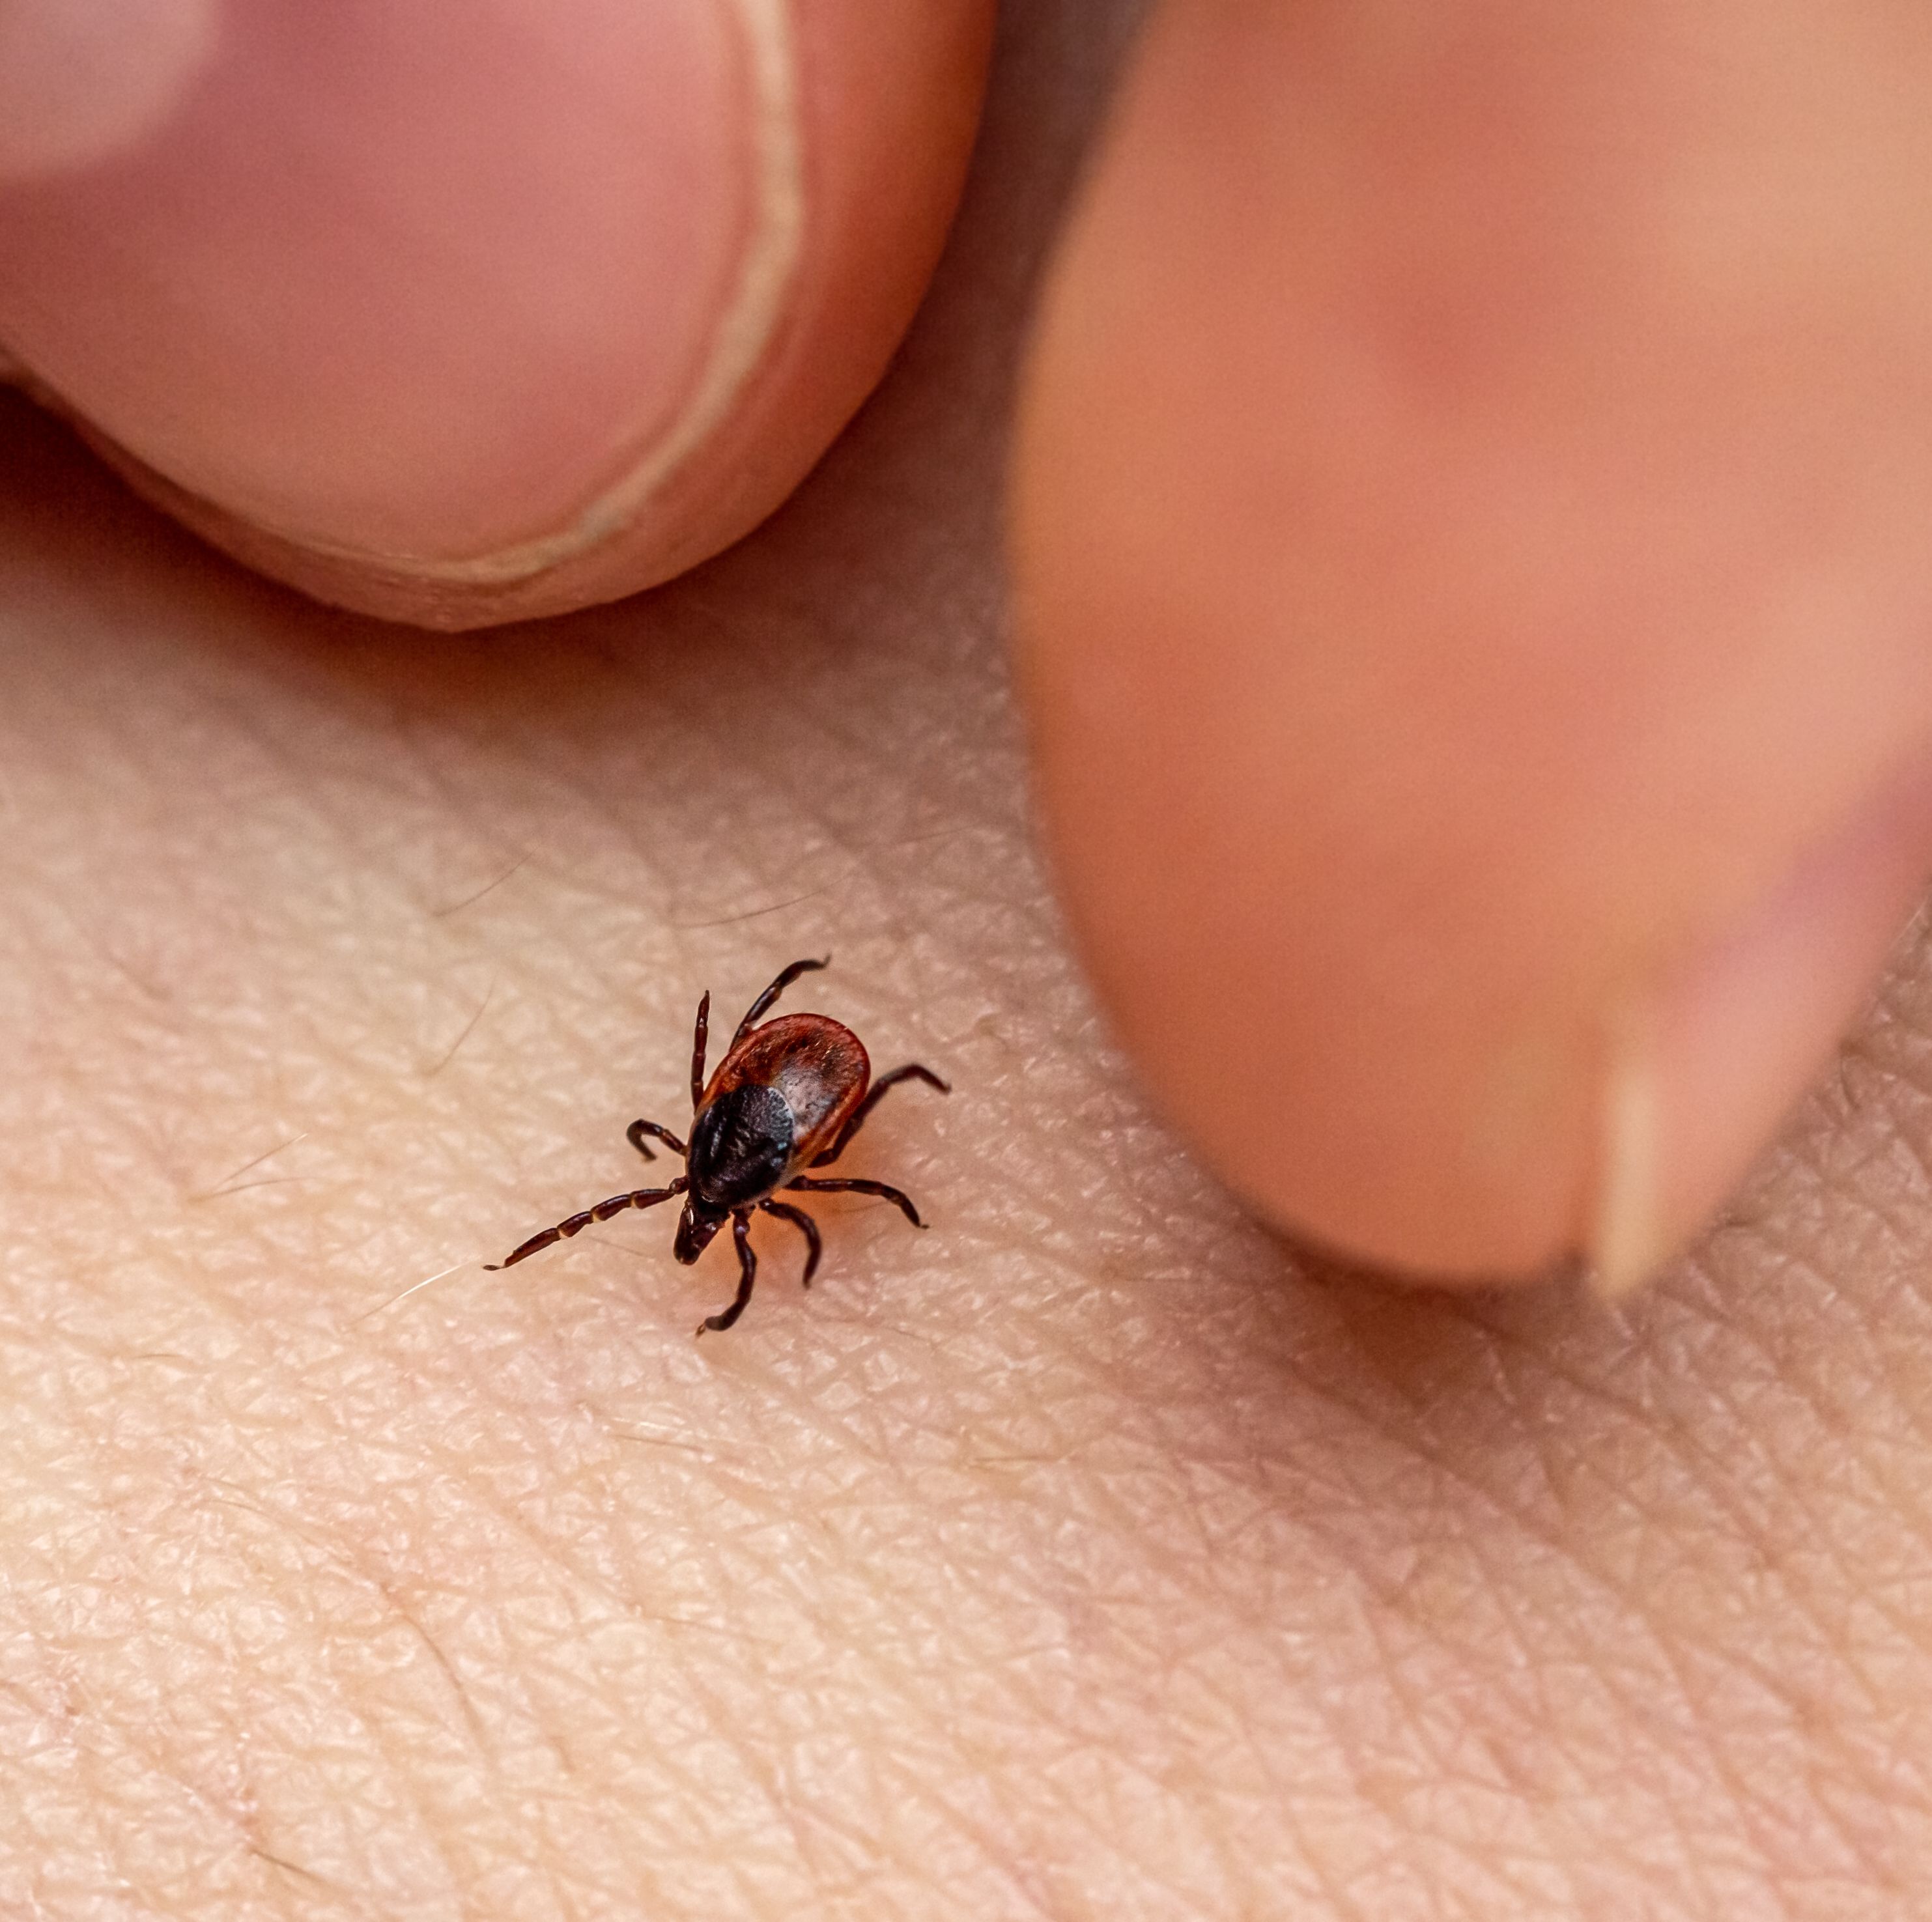 How to Remove a Tick Head From Your Skin—the Right Way